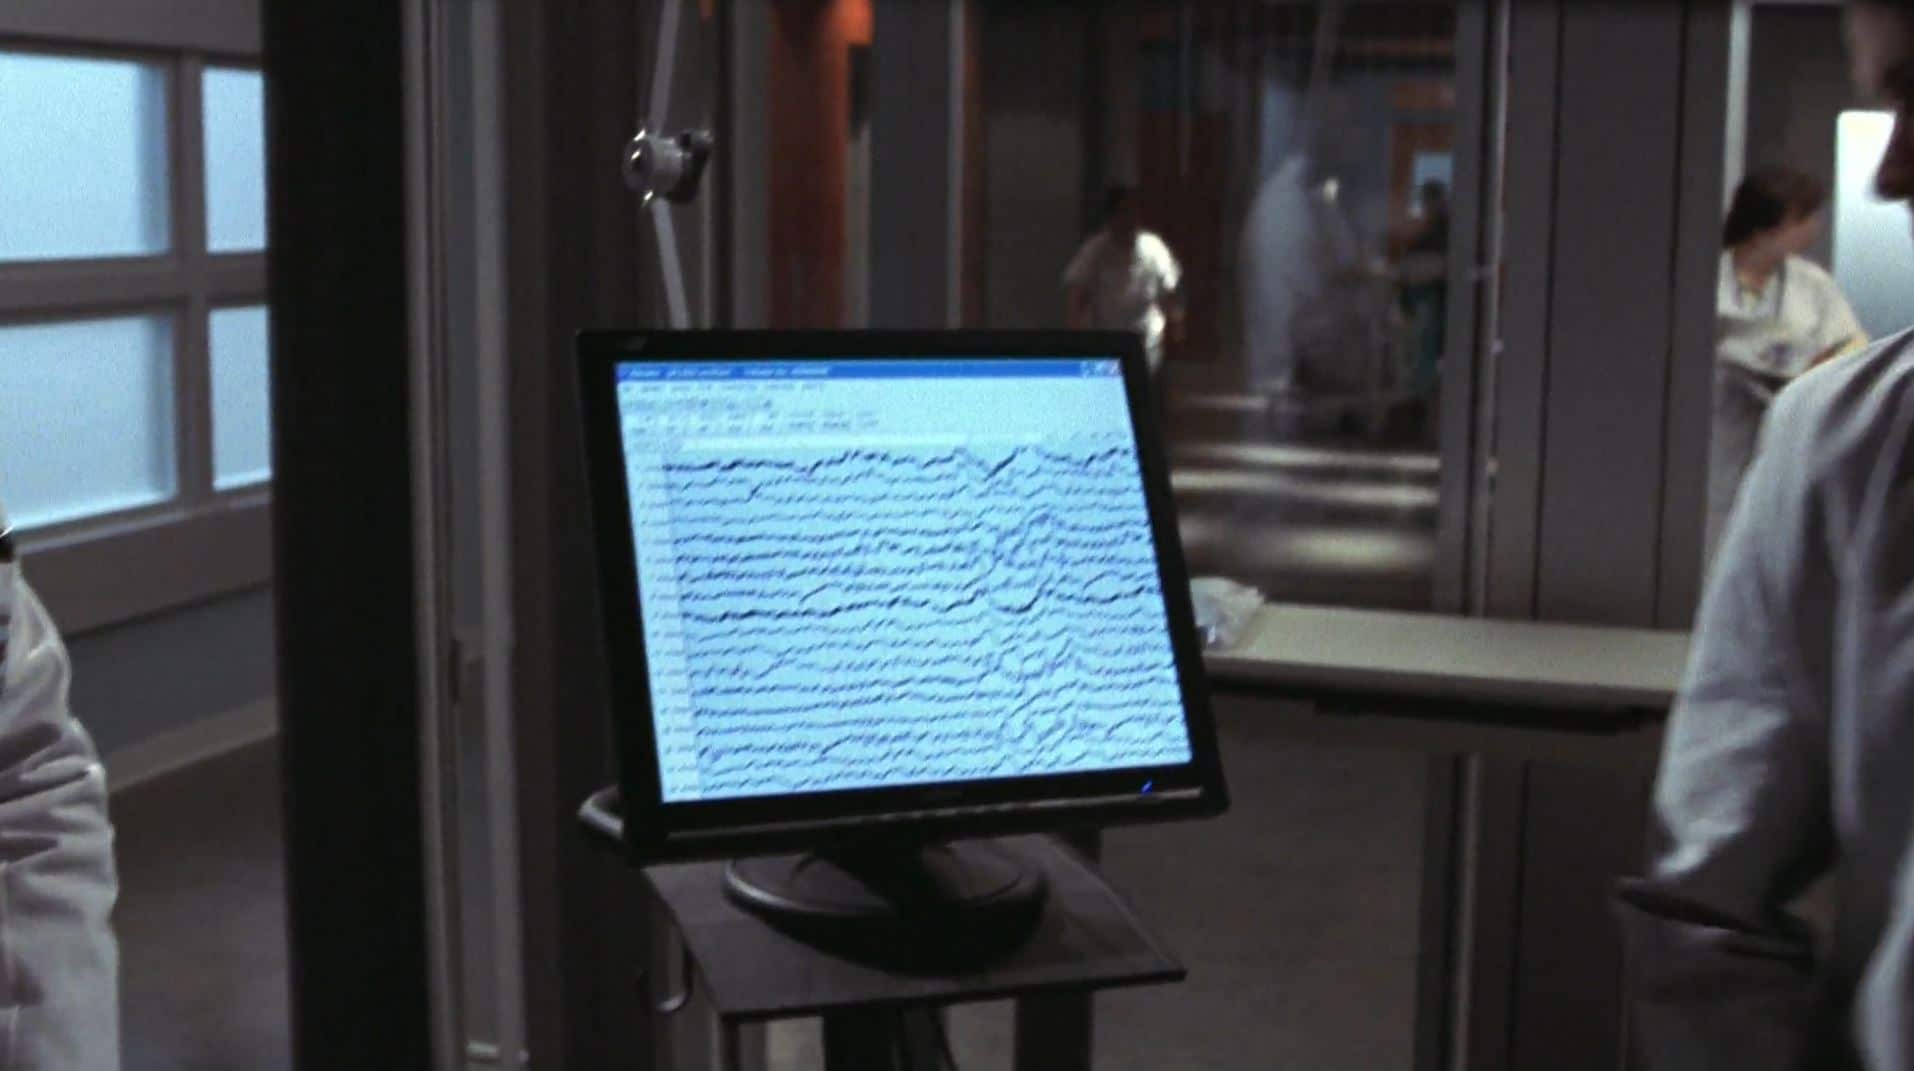 EEG software displayed on a mobile cart